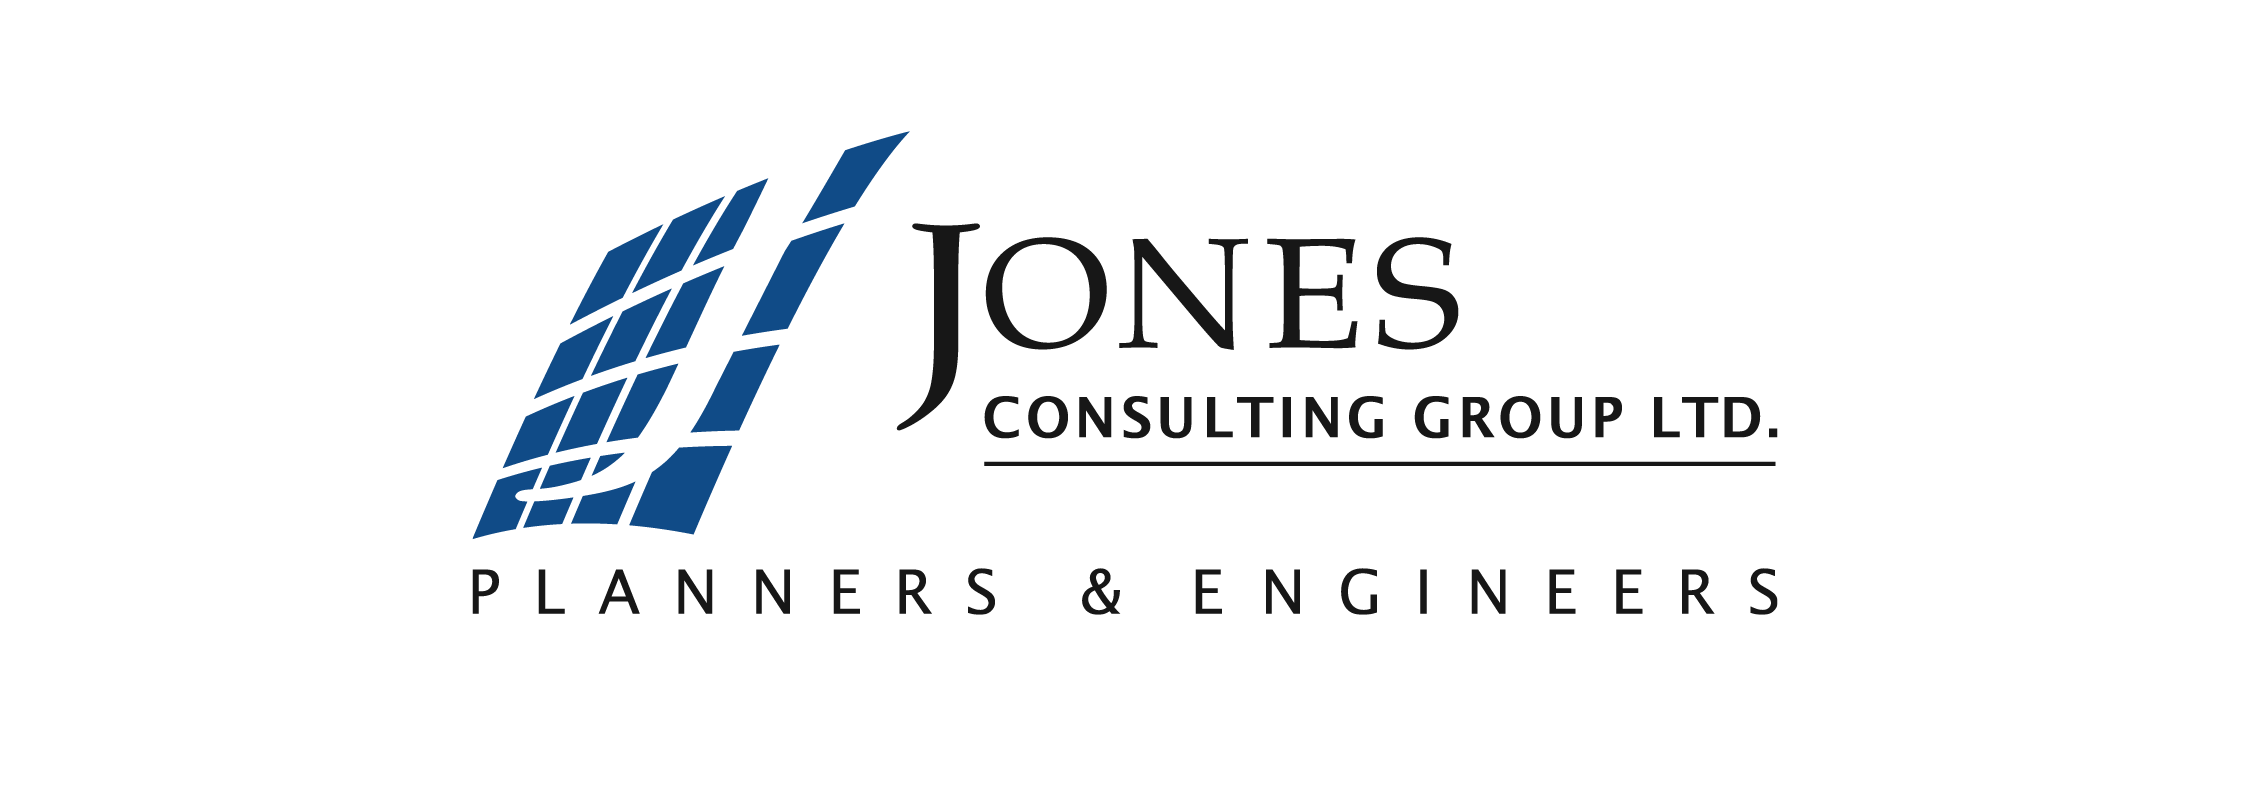 Jones Consulting Group Ltd. Planners and Engineers (logo)